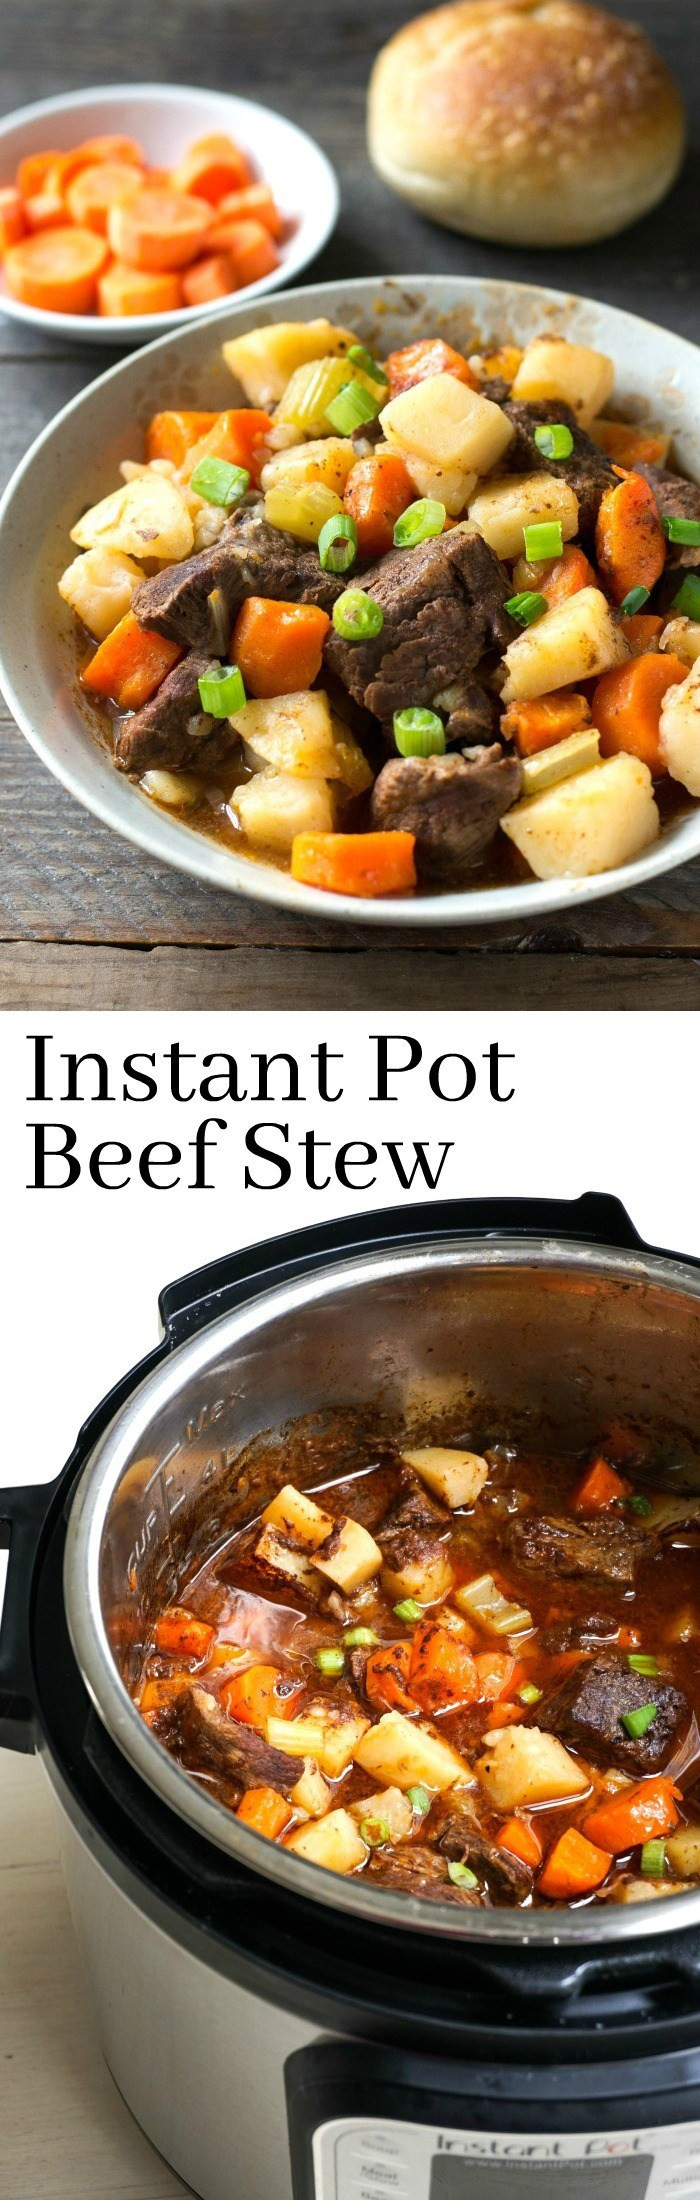 Instant Pot Stew Meat
 The Best Instant Pot Beef Stew Recipe Easy Family Dinner